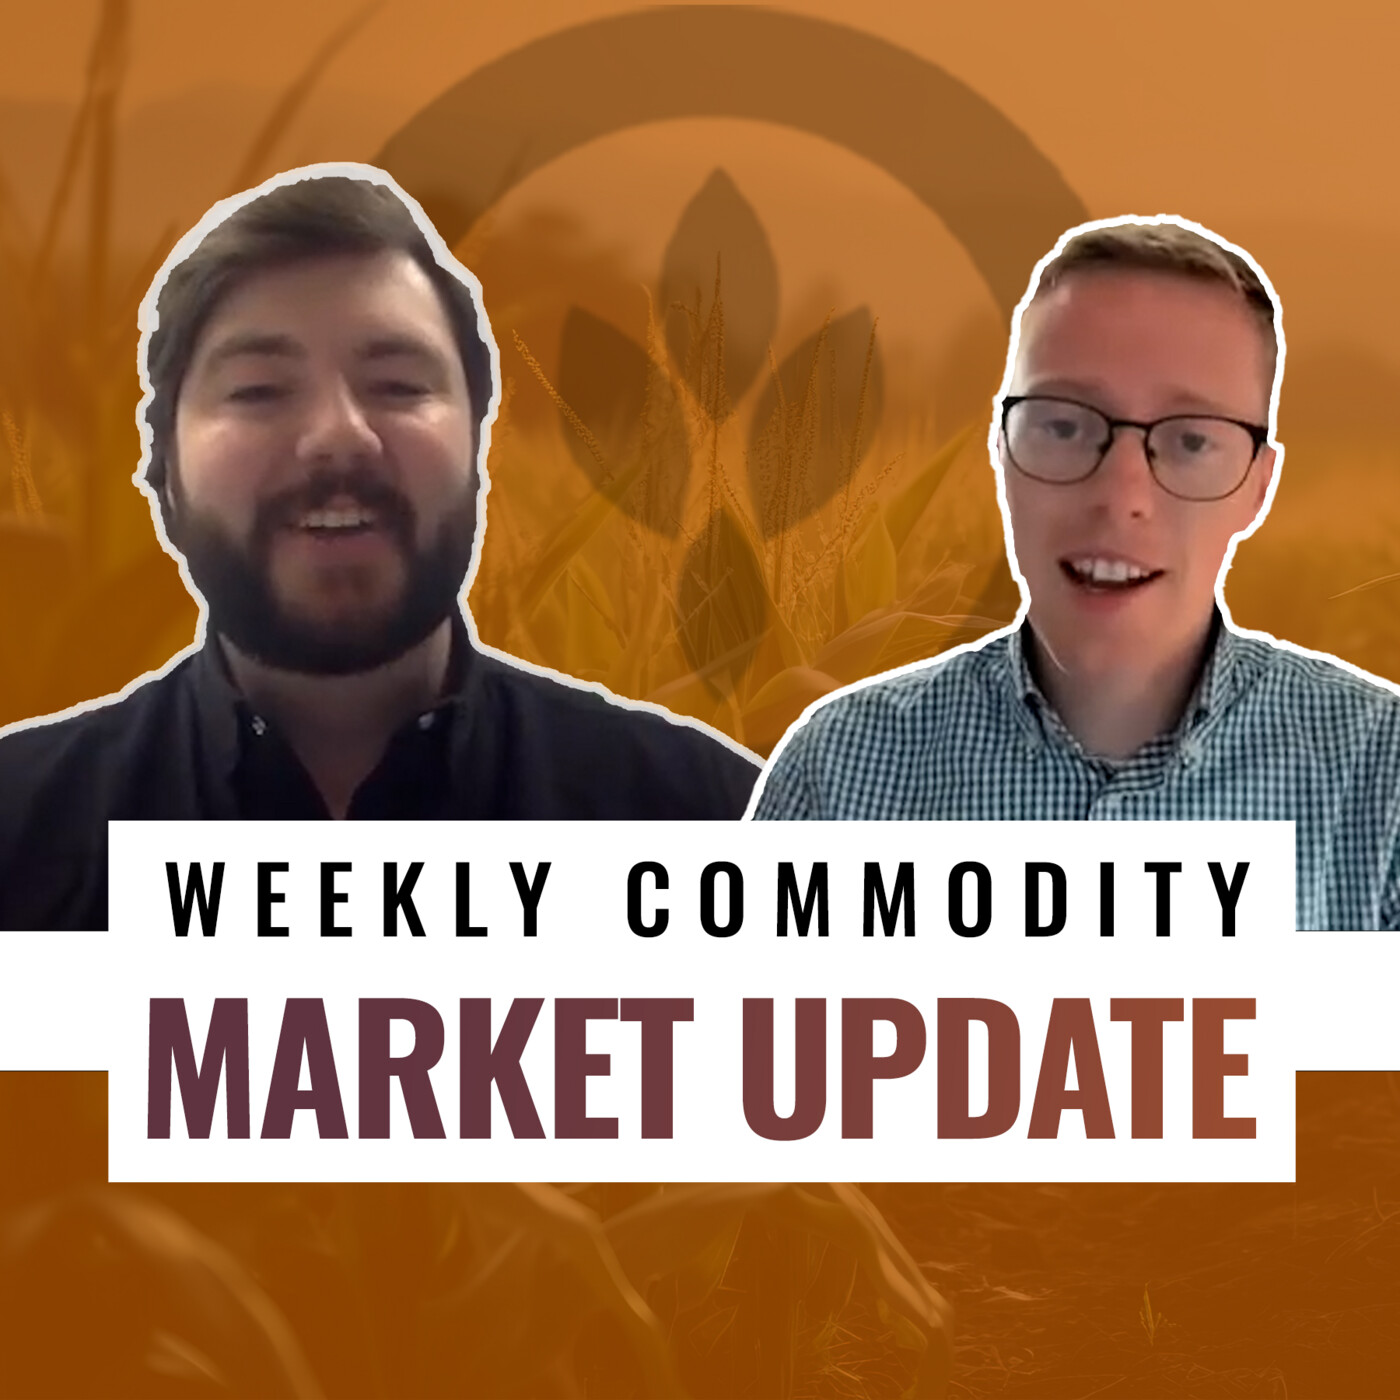 Weekly Commodity Market Update: Shifting U.S. job market speaks to general economic picture